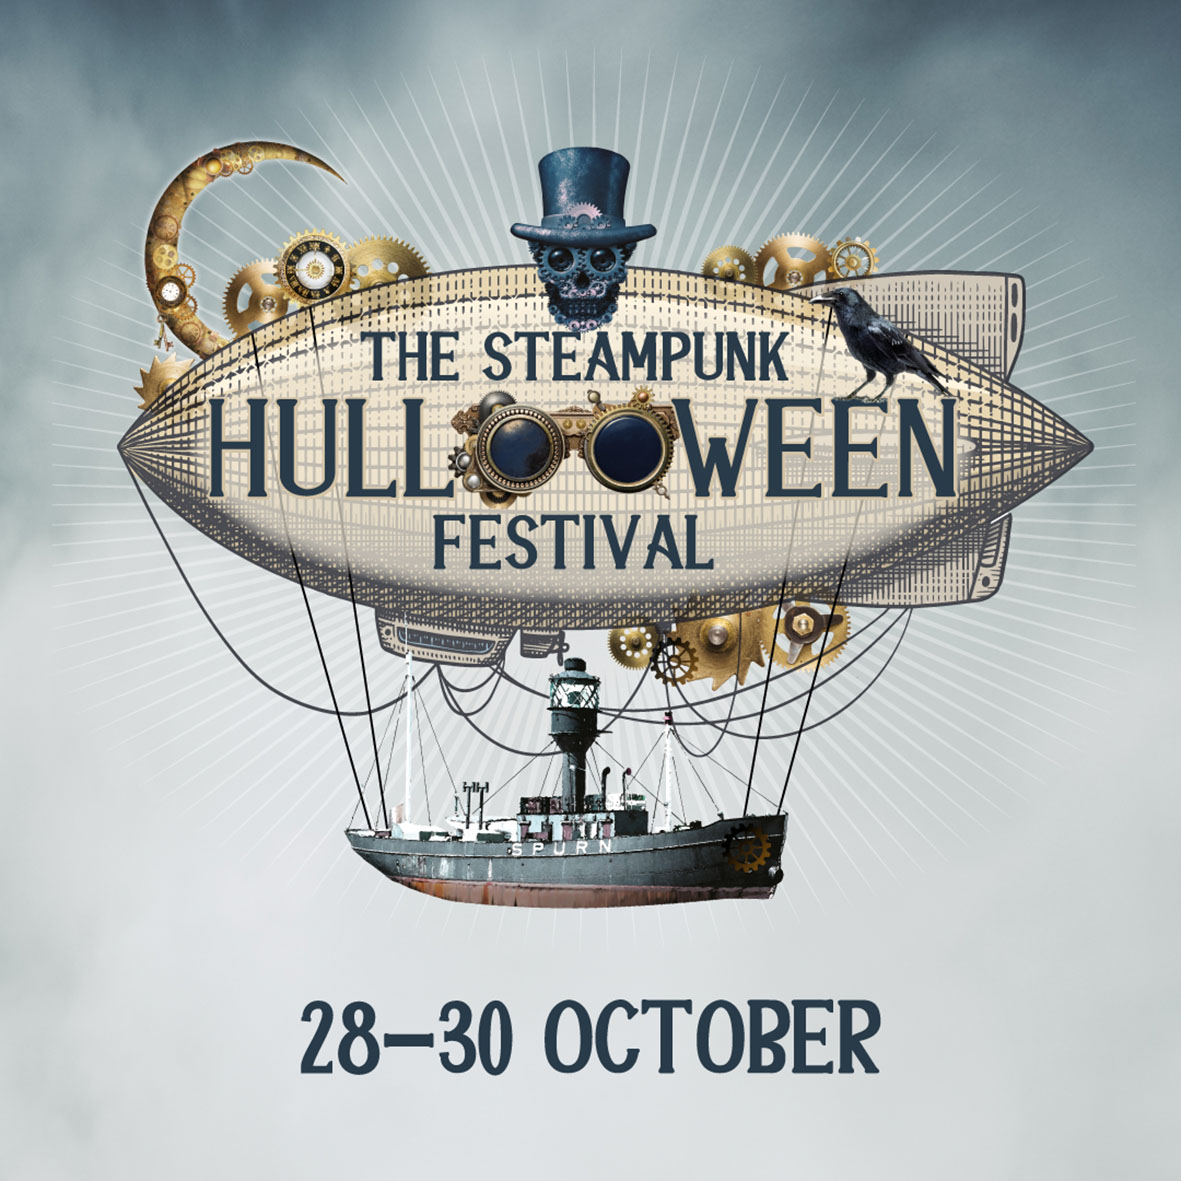 HullBID excited to bring Hulloween Steampunk Festival to city centre